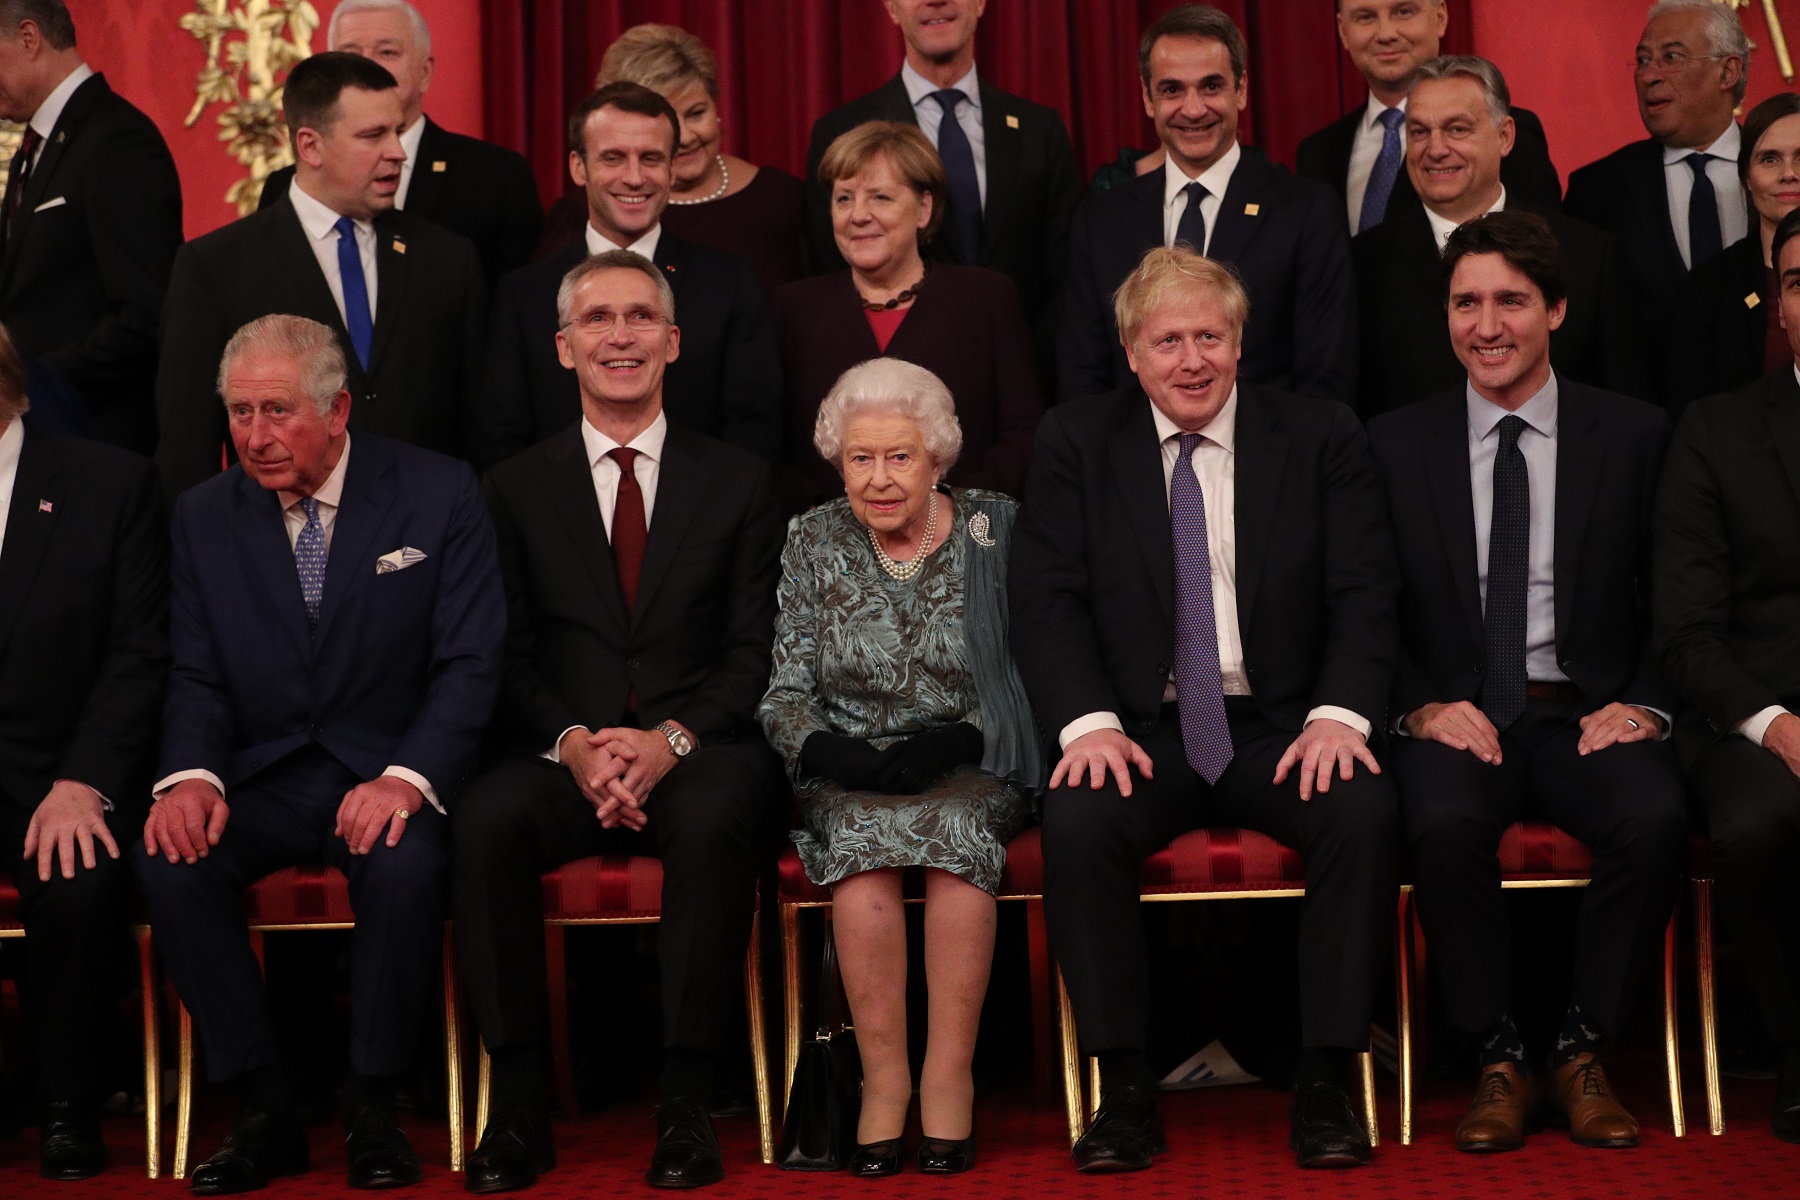 LONDON, ENGLAND - DECEMBER 03: Prince Charles, Prince of Wales, Jens Stoltenberg, Nato Secretary General, Queen Elizabeth II, Boris Johnson, Prime Minister of the United Kingdom and Justin Trudeau, Prime Minister of Canada join other Nato leaders for a group photograph at a reception for NATO leaders hosted by Queen Elizabeth II at Buckingham Palace on December 3, 2019 in London, England. Her Majesty Queen Elizabeth II hosted the reception at Buckingham Palace for NATO Leaders to mark 70 years of the NATO Alliance. (Photo by Yui Mok - WPA Pool/Getty Images)